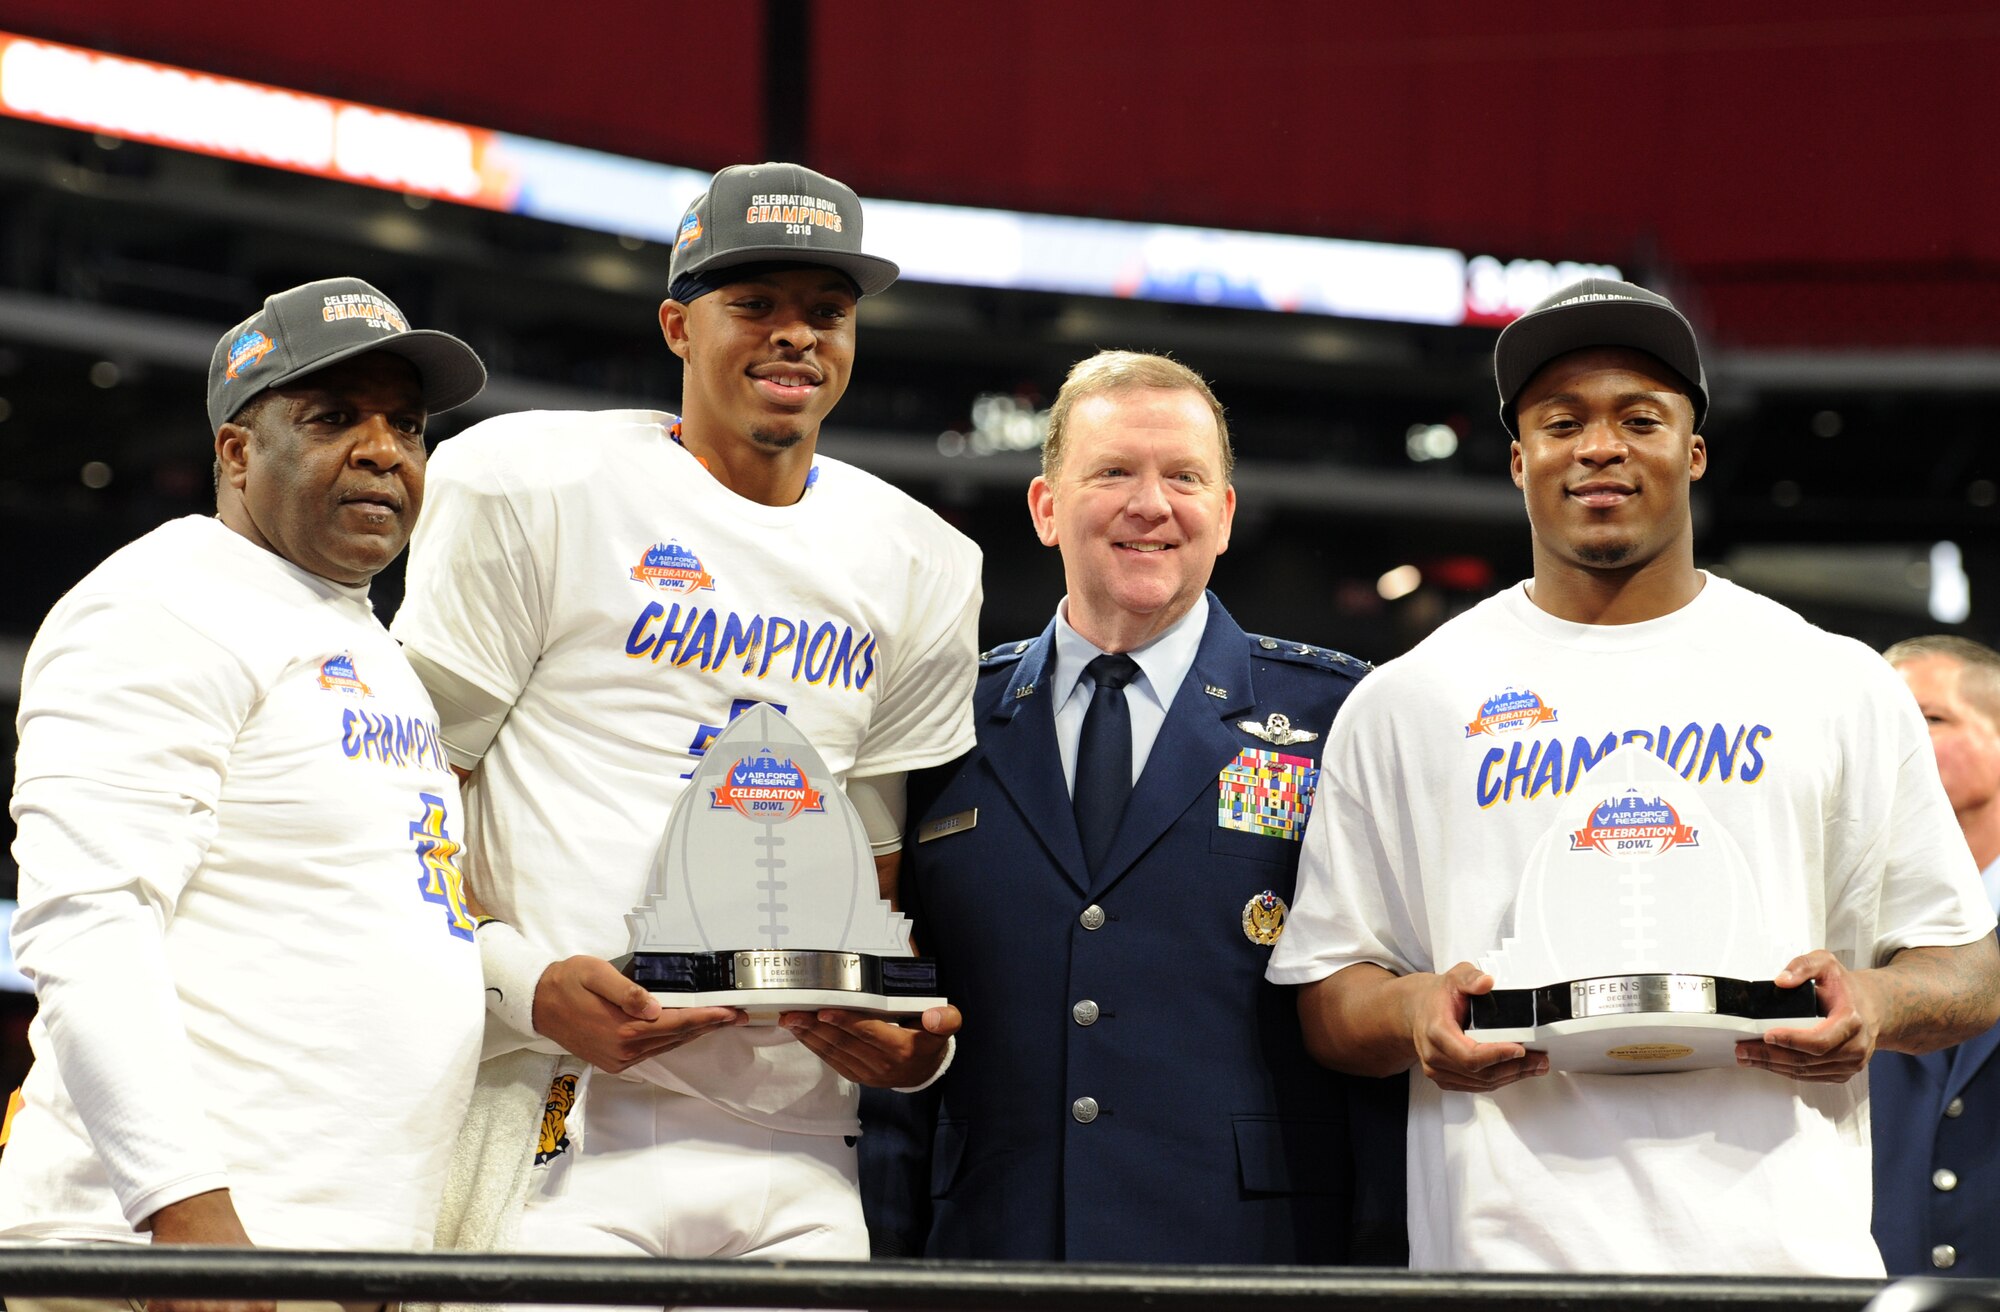 Air Force Reserve returns as title sponsor of the 2018 Celebration Bowl